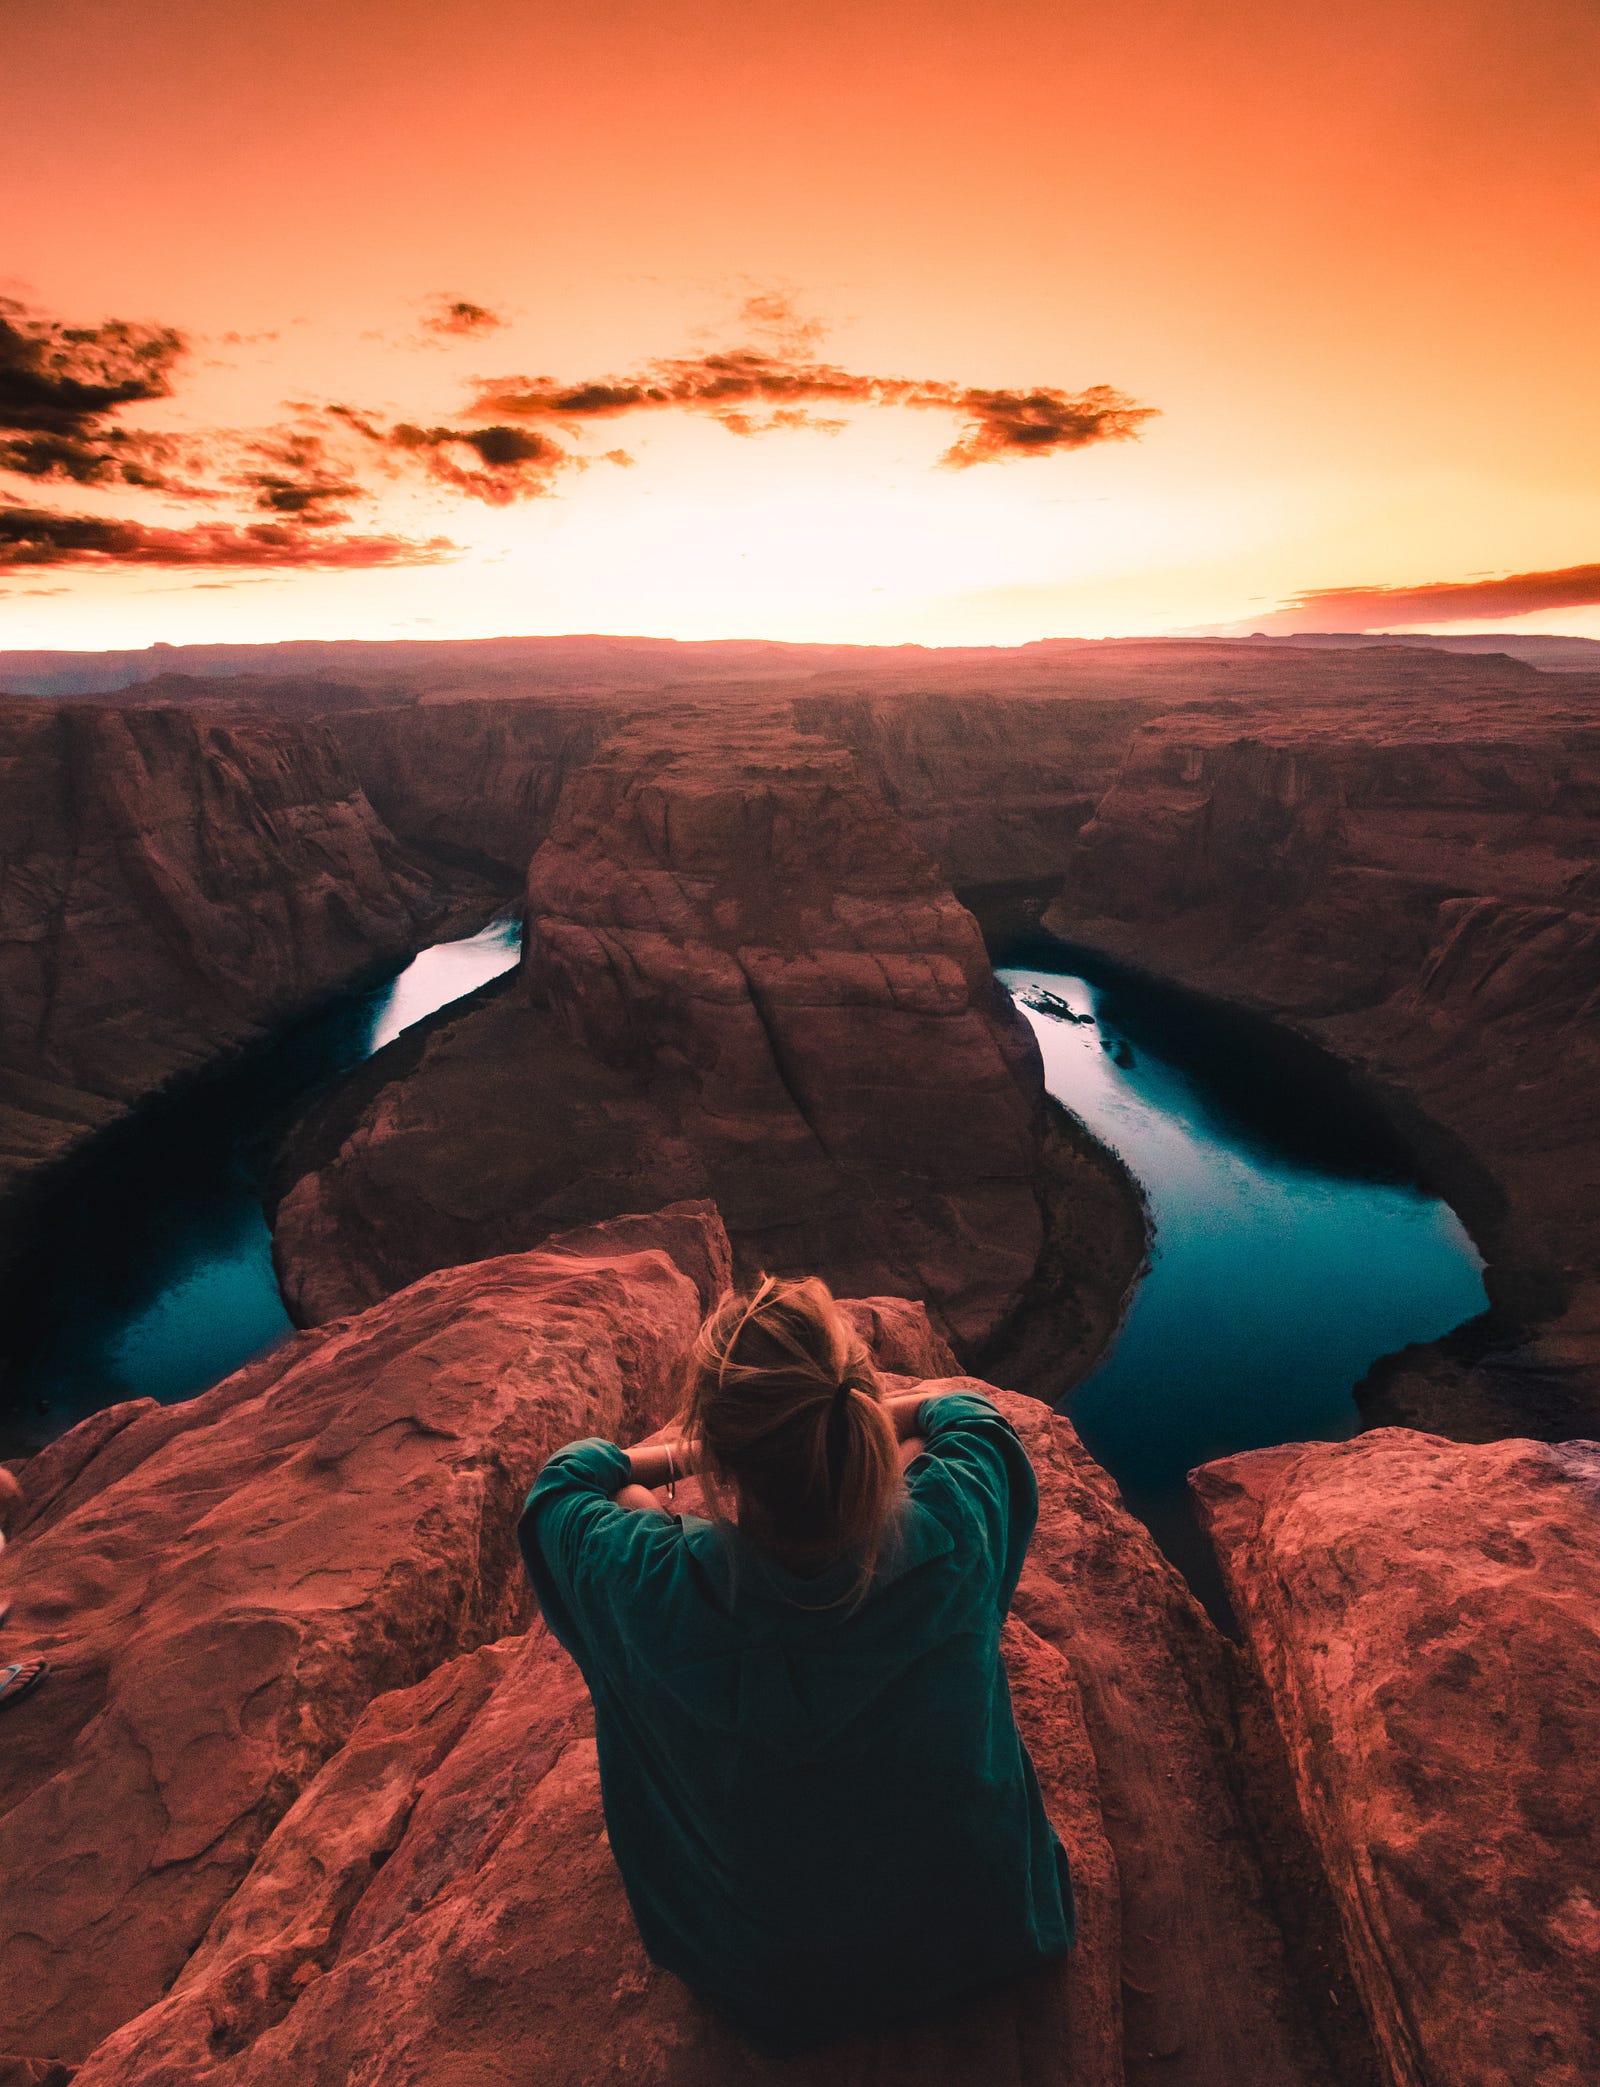 A woman laying on a roack over the grandcanyon at sunset